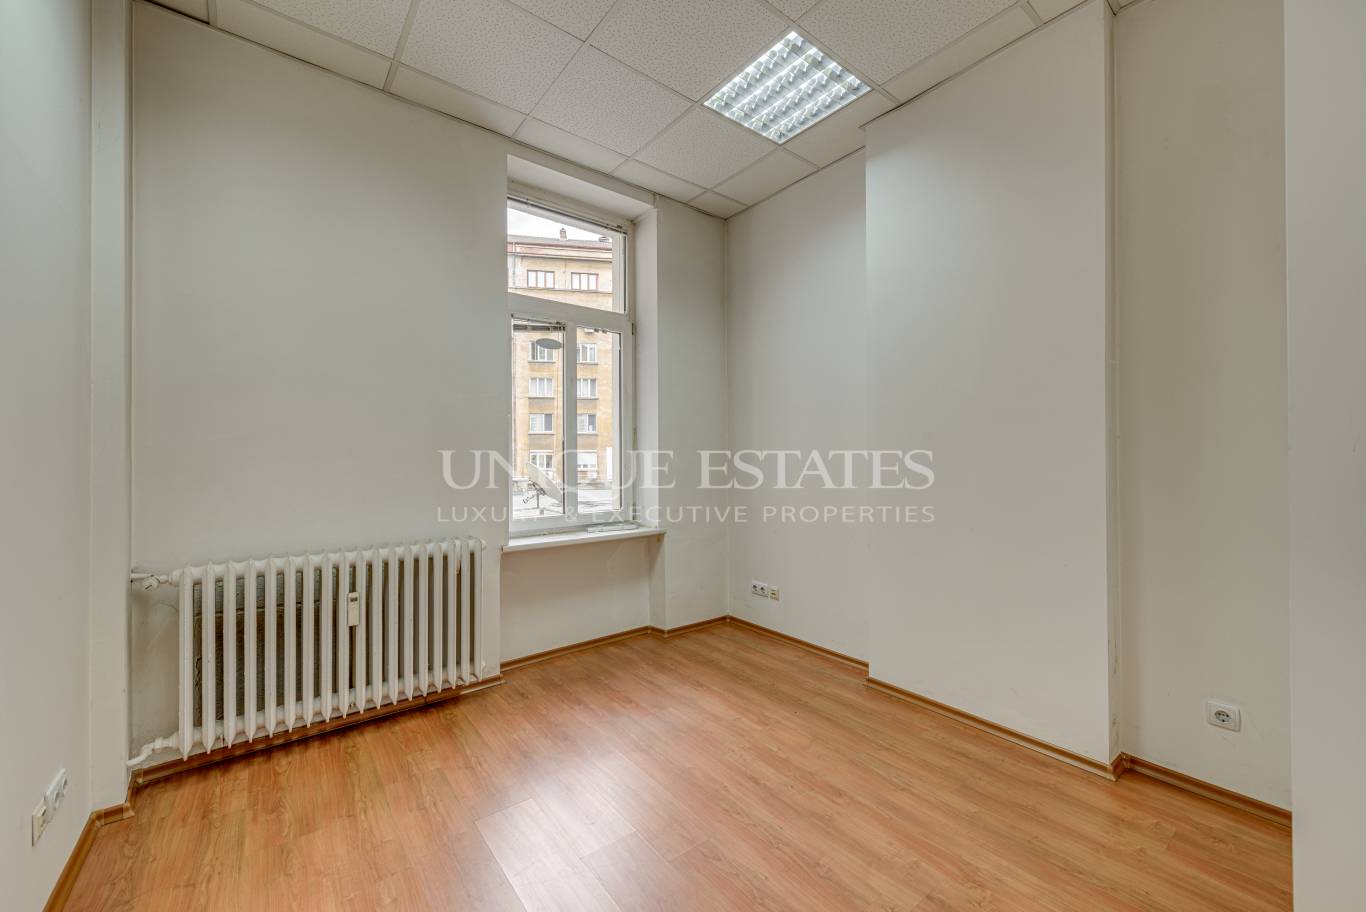 Office for rent in Sofia, Downtown with listing ID: K4831 - image 6